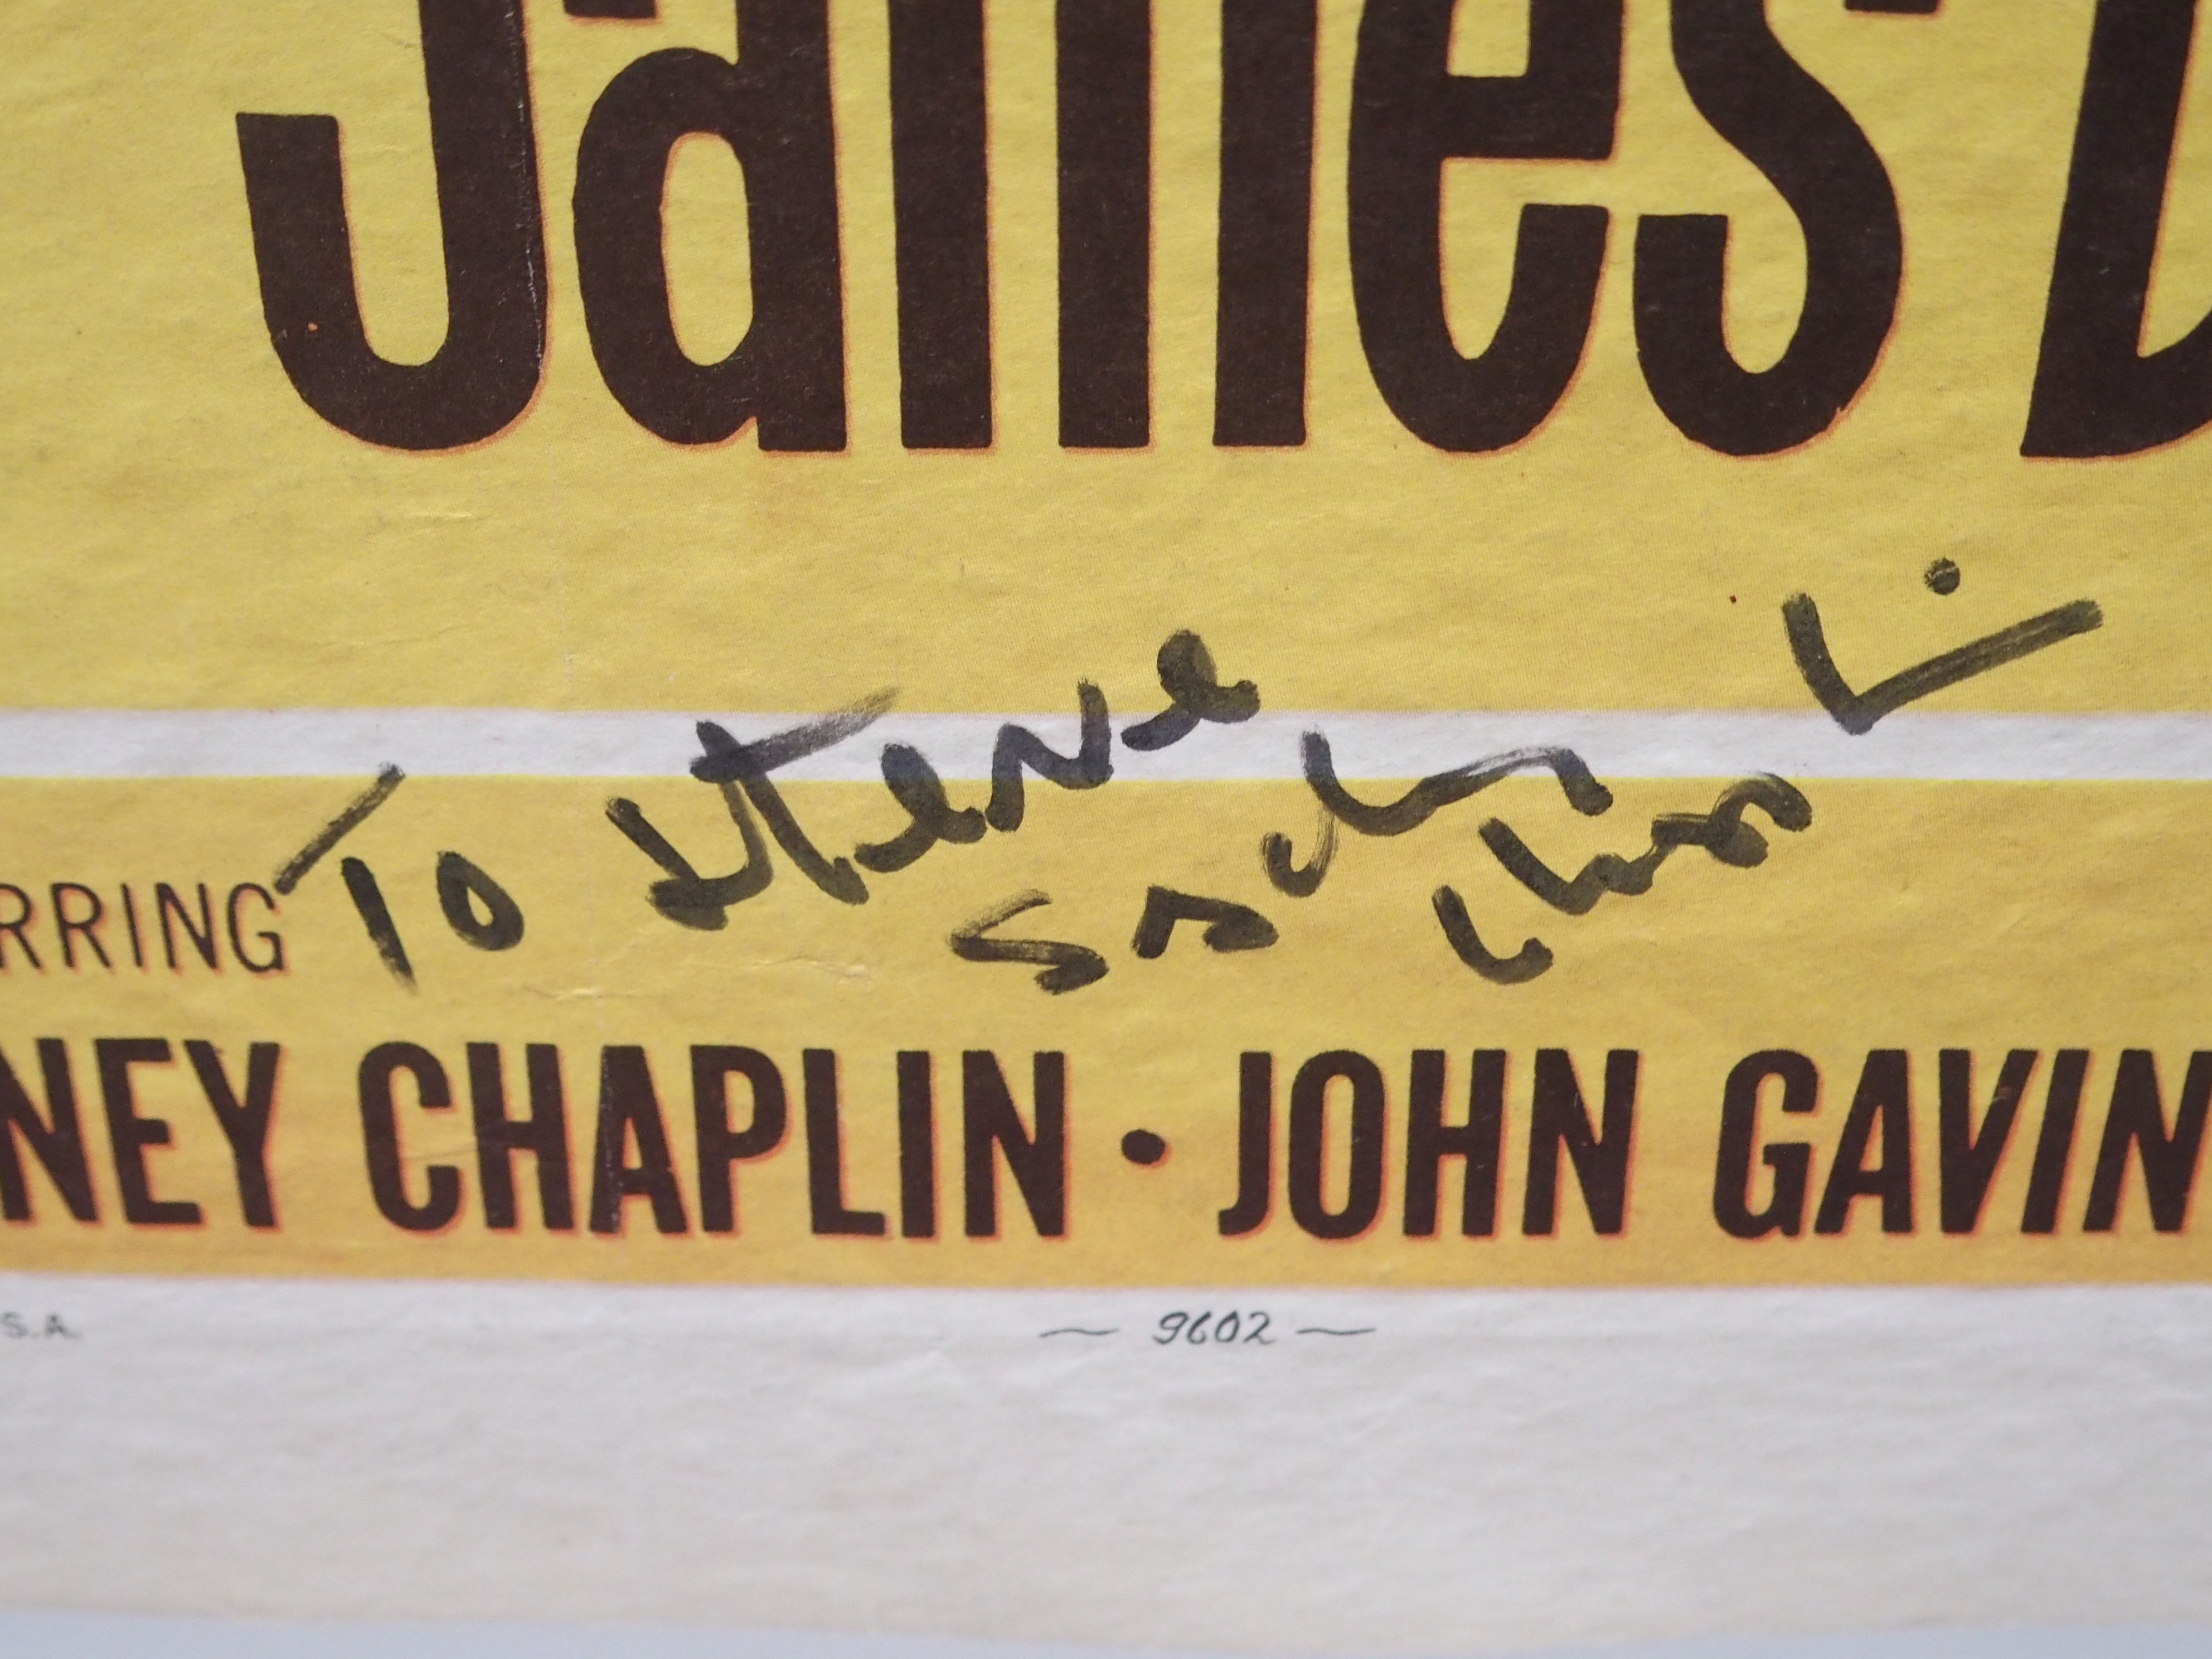 "QUANTEZ" movie poster, 1957, dedicated and autographed by Sydney Chaplin, horizontal and vertical - Image 2 of 4